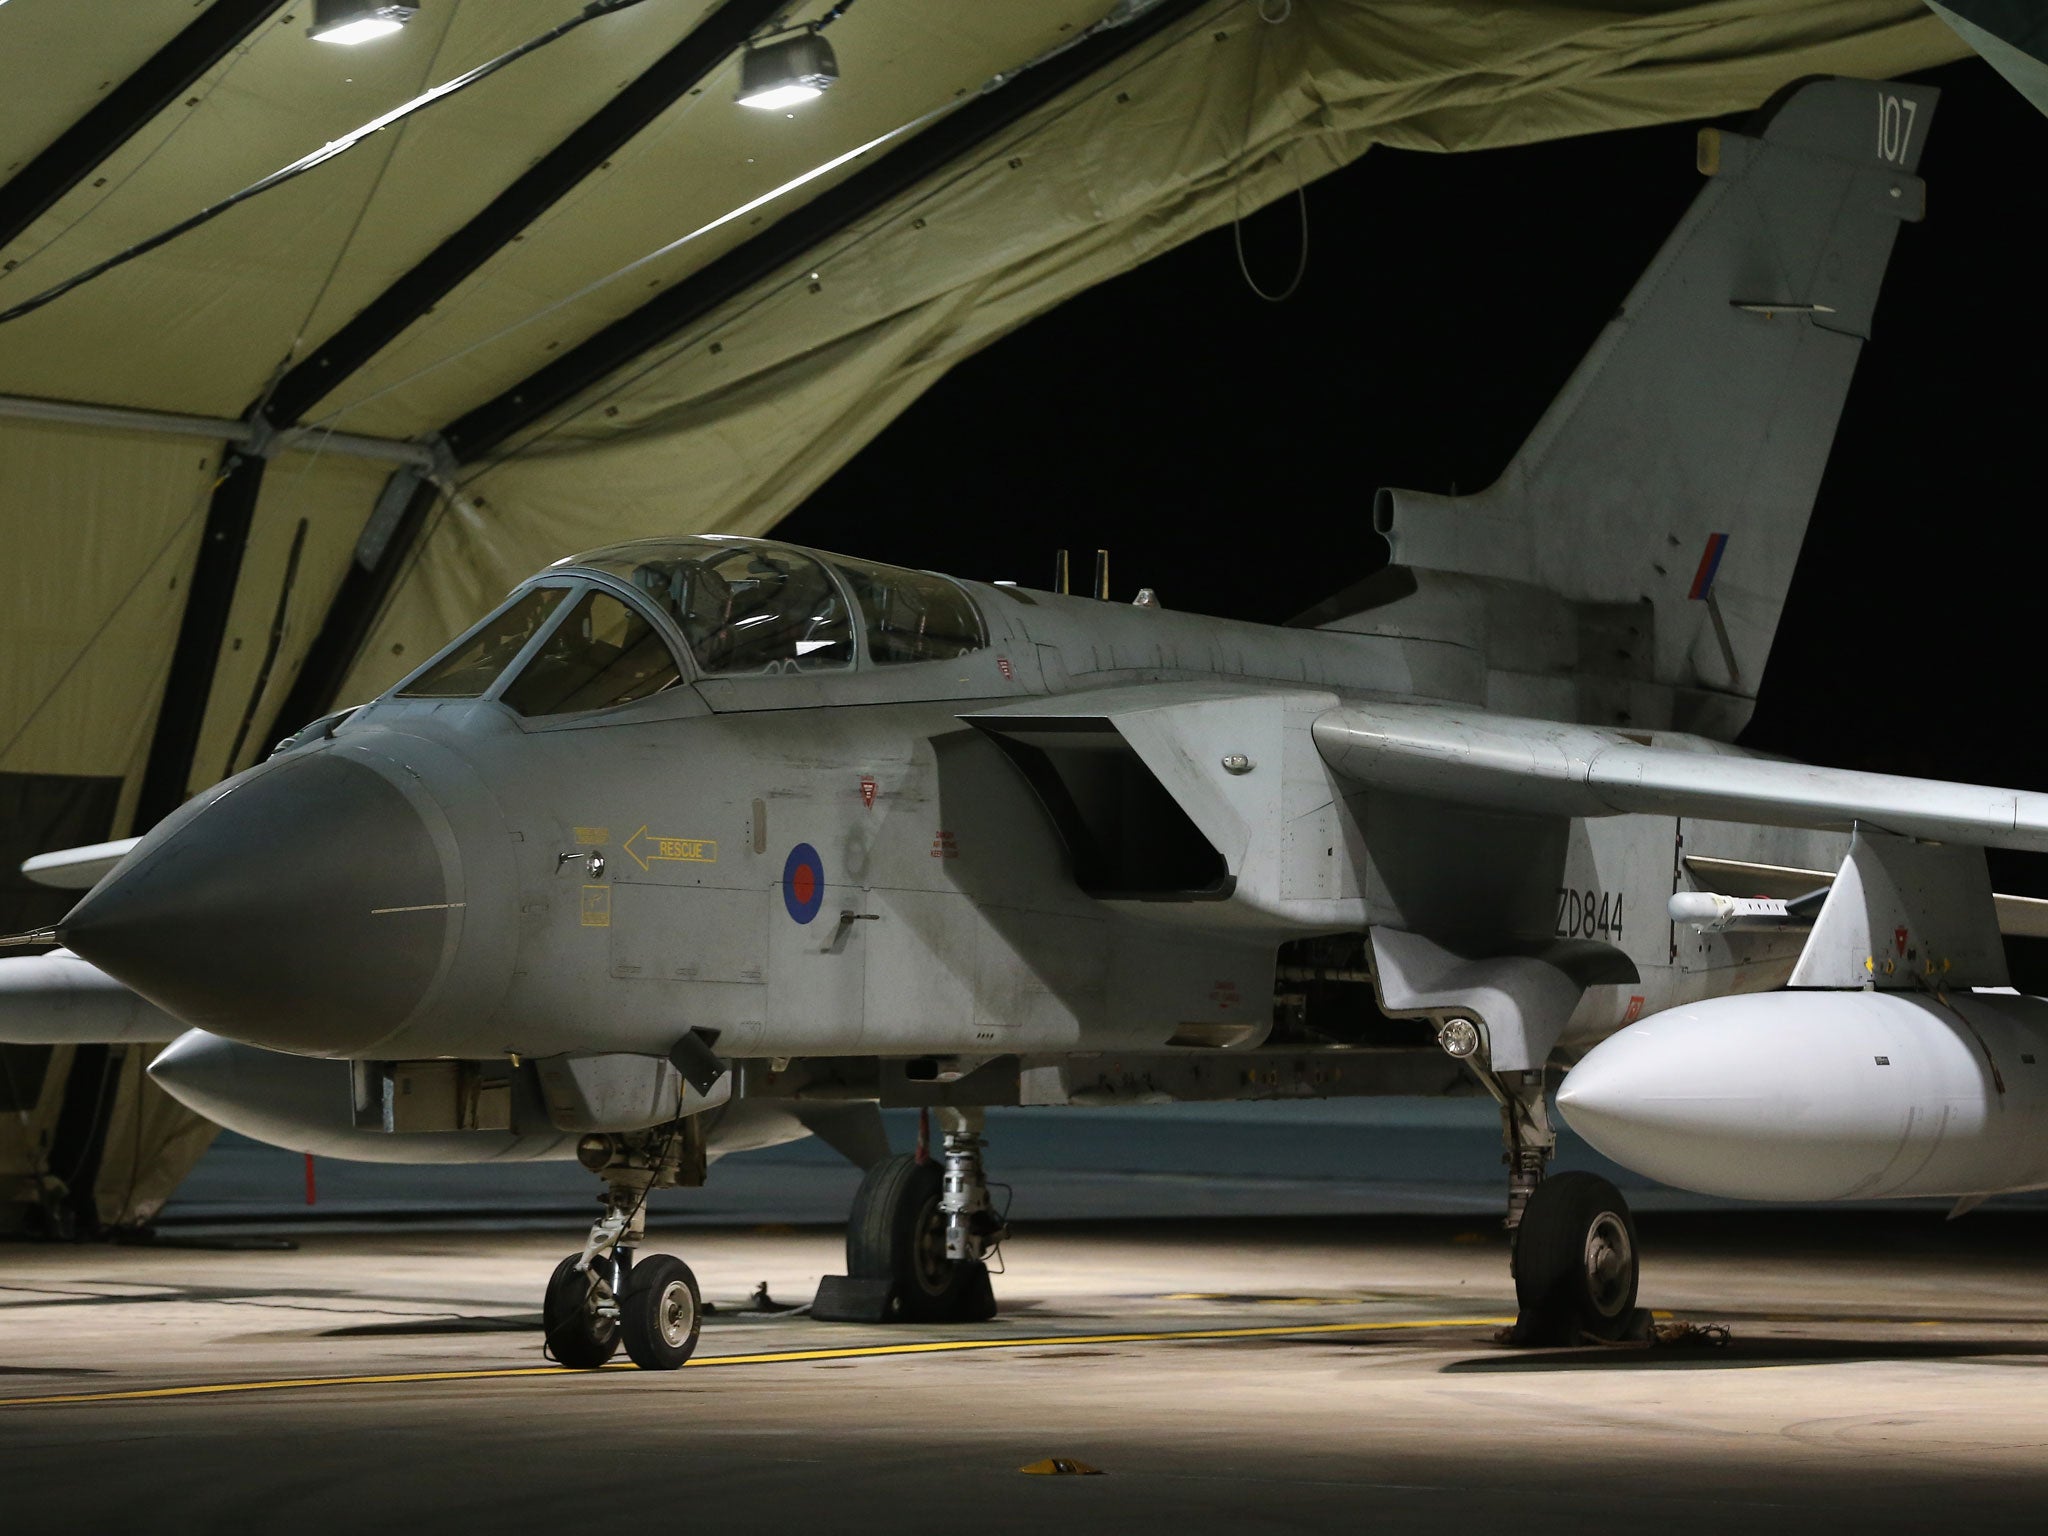 The RAF Tornado GR4 has a reputation for great reliability and carries all​ the latest weapons systems